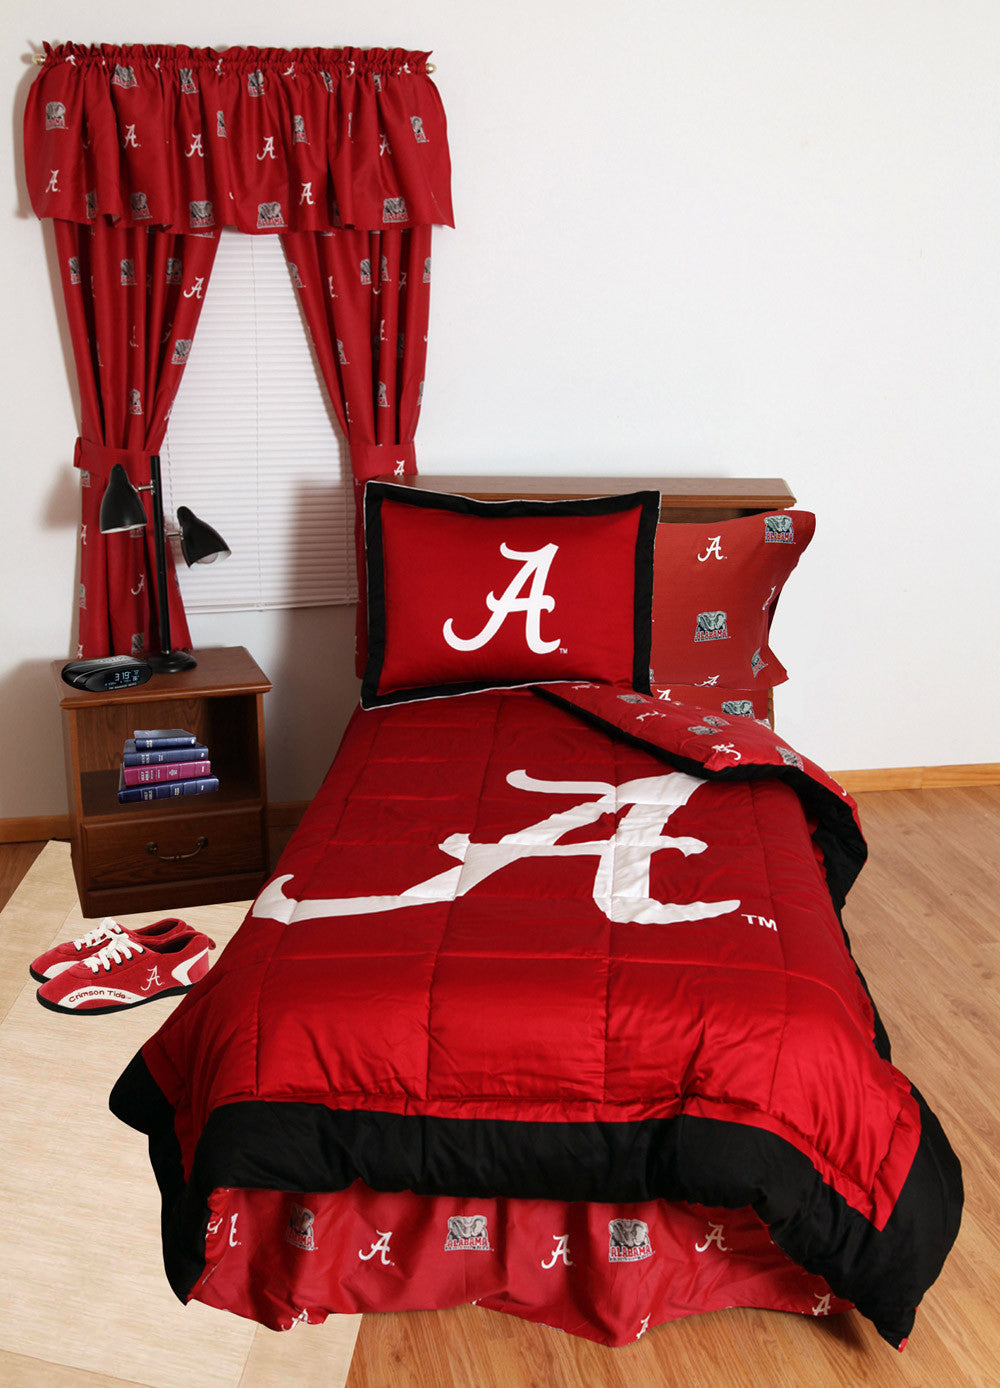 Alabama Bed In A Bag King - With Team Colored Sheets - Alabbkg By College Covers